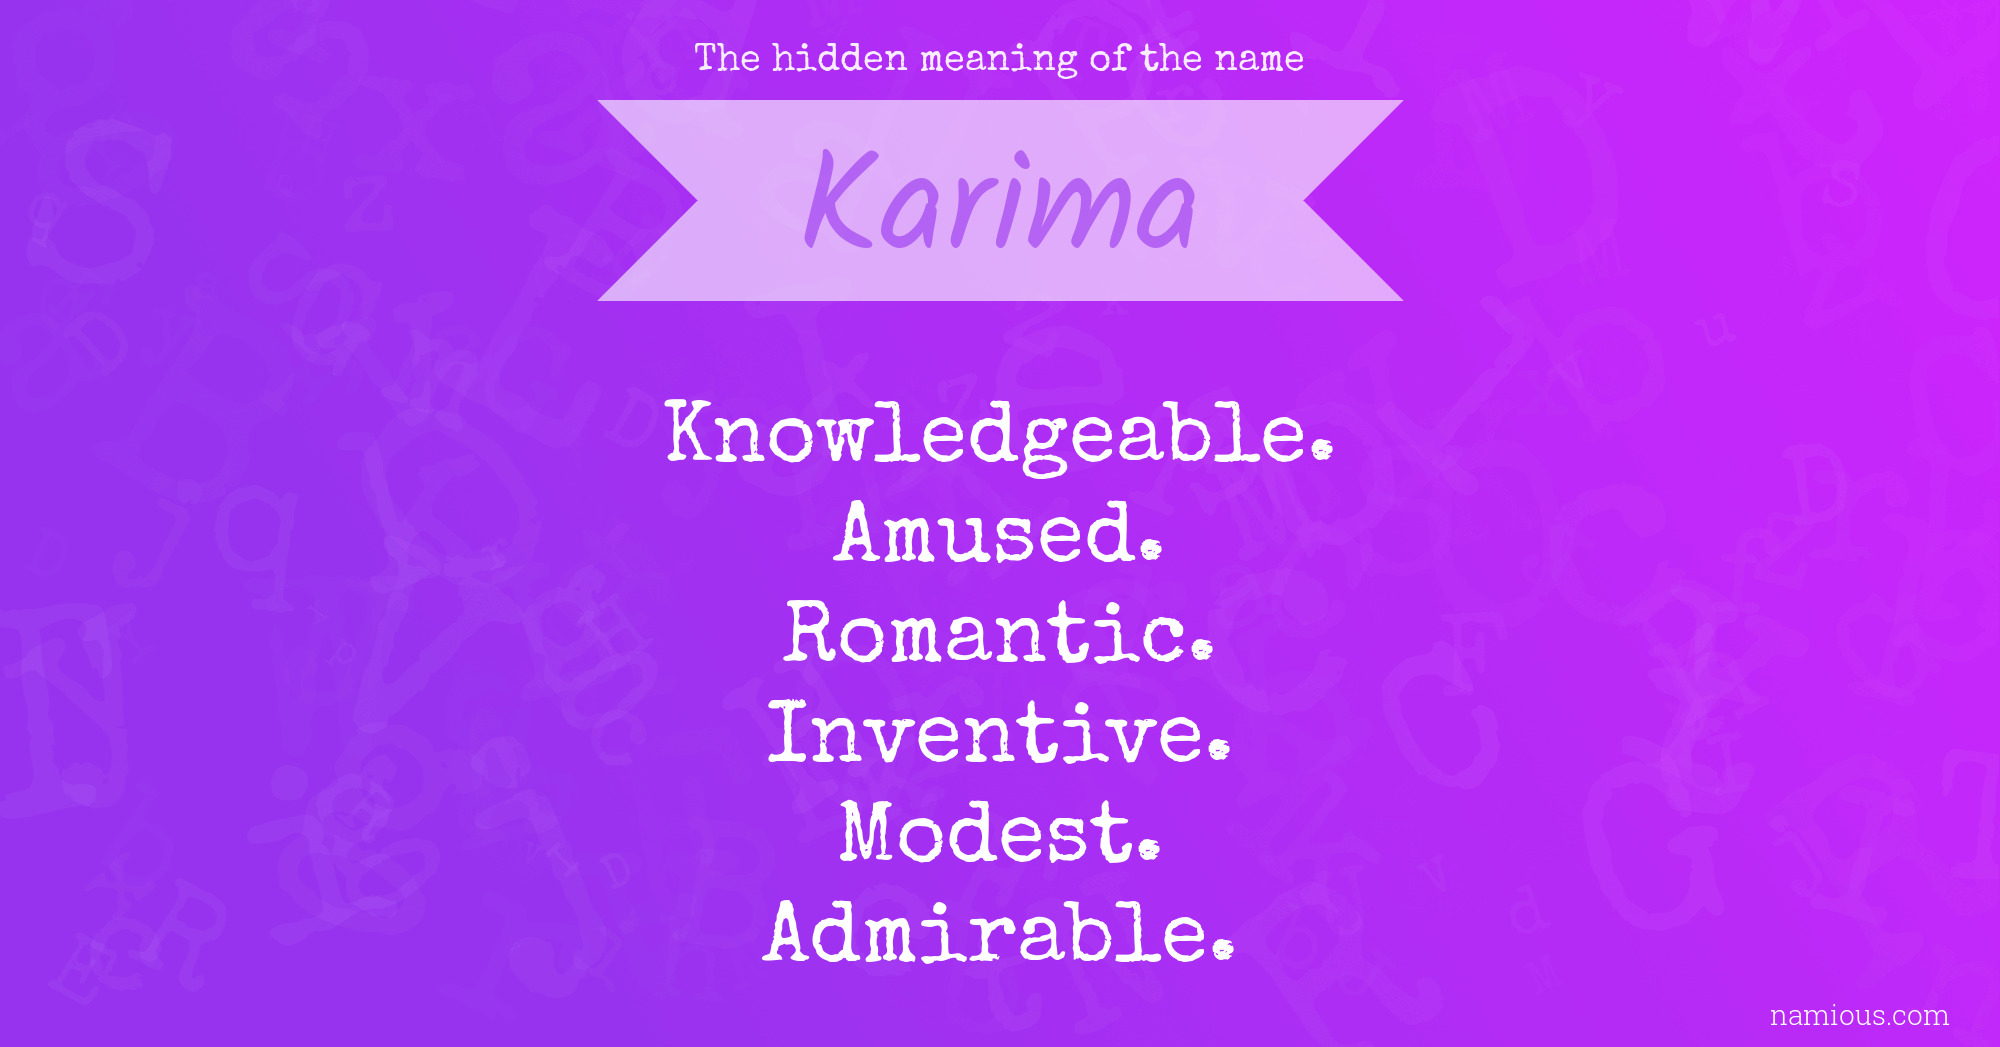 The hidden meaning of the name Karima